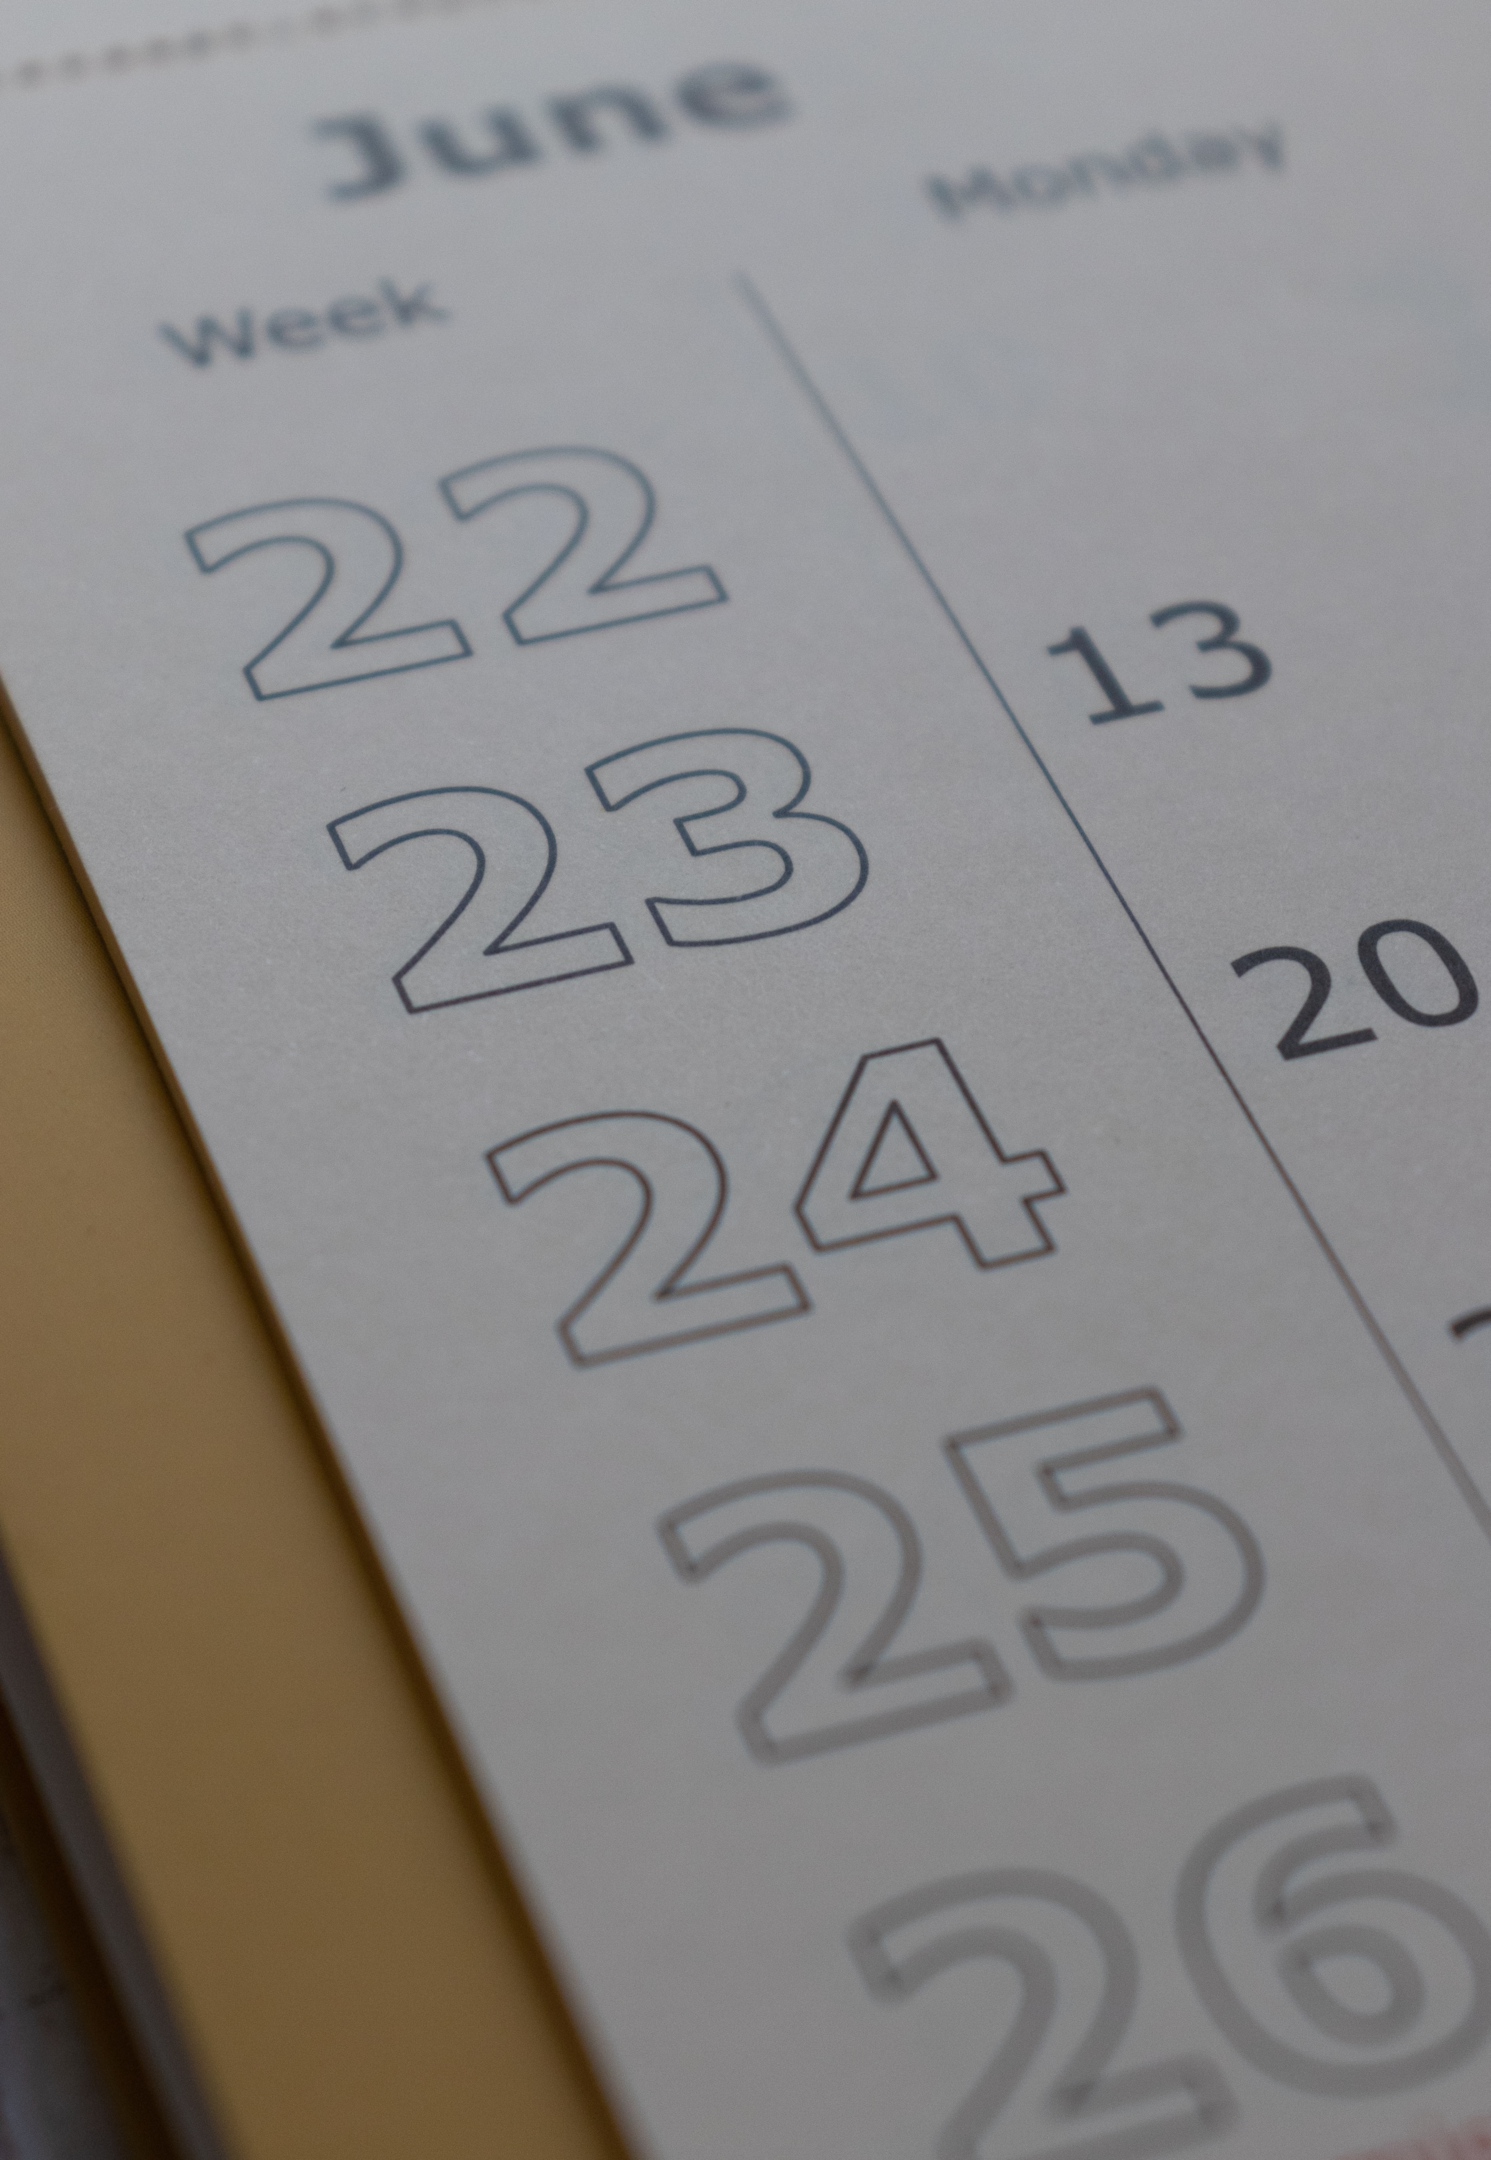 Your first hearing should occur within 41 calendar days.